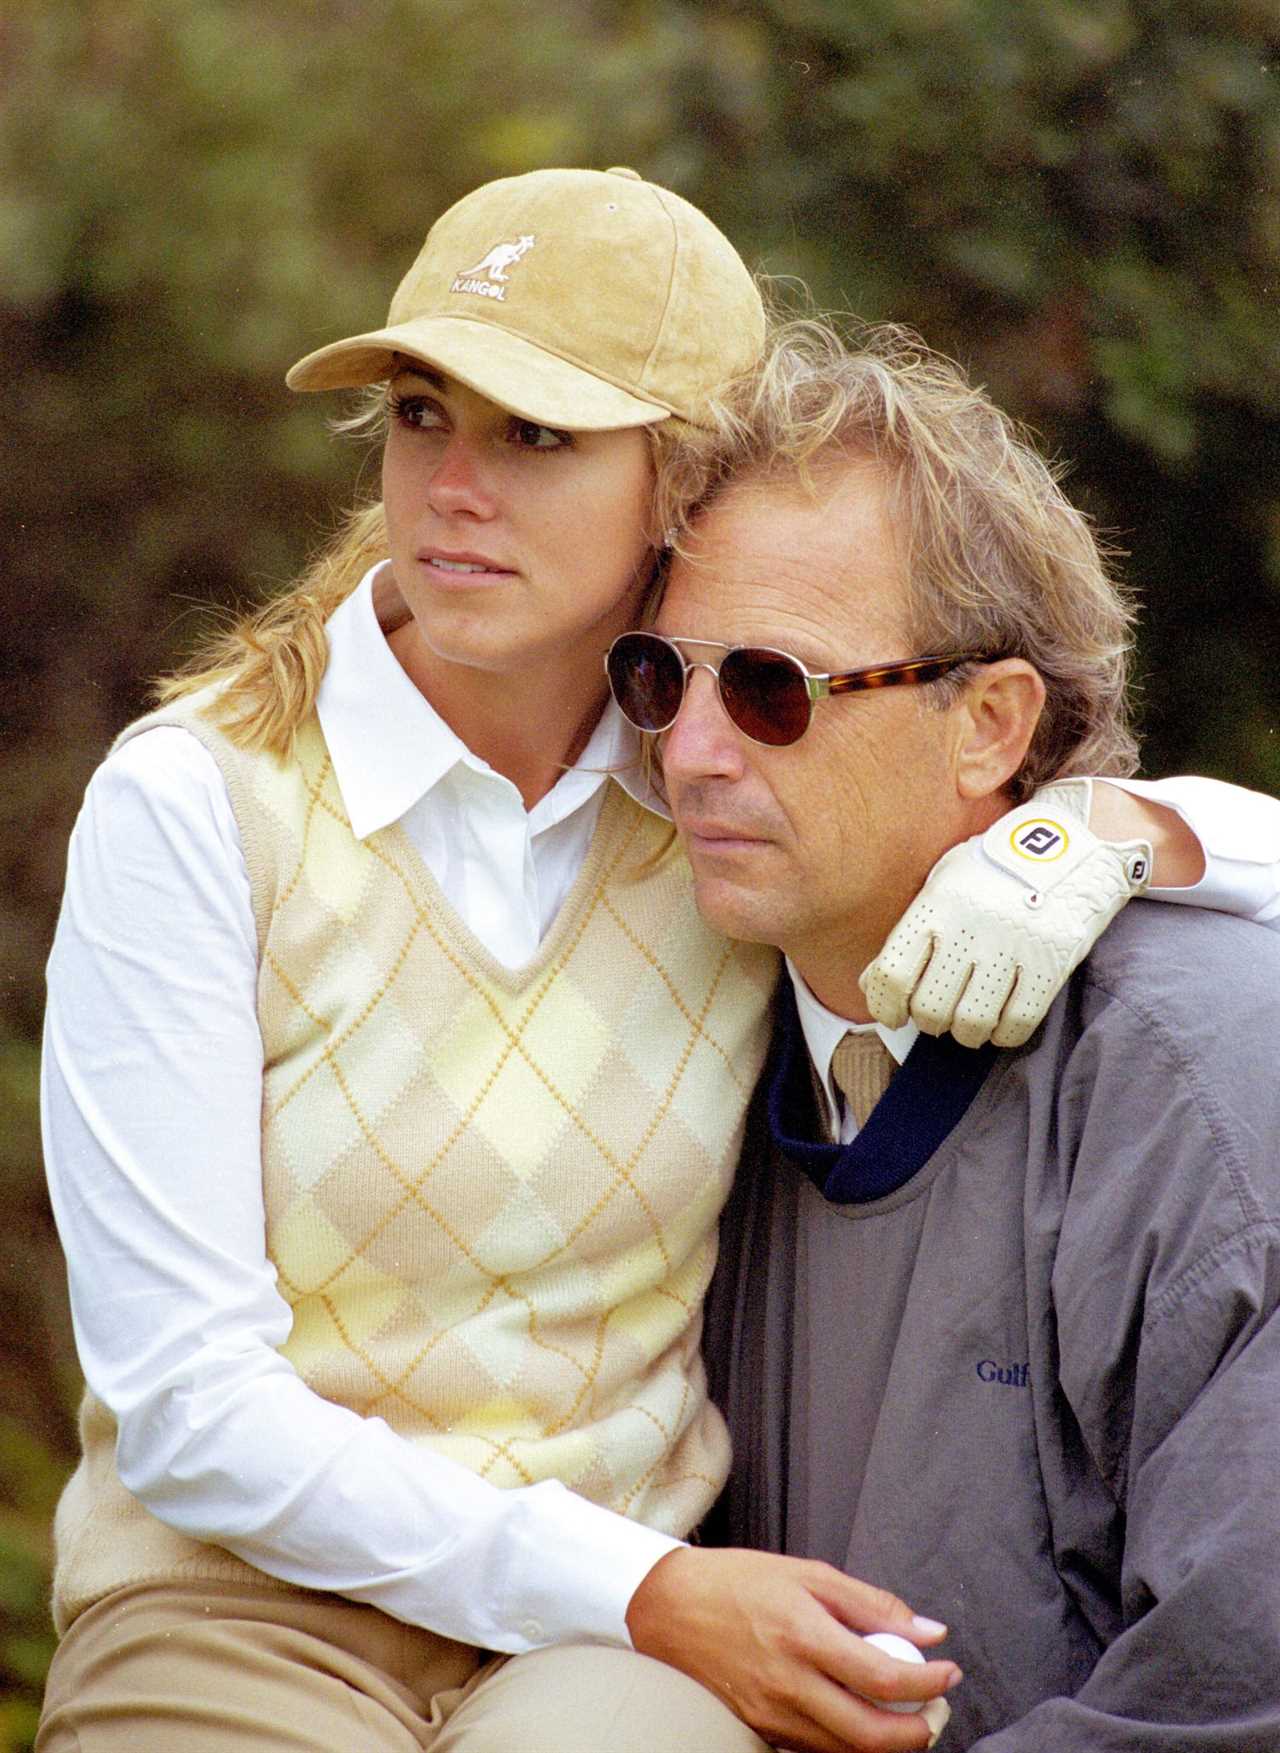 Kevin Costner and Christine Baumgartner, photographed here at a Pro-Celebrity Golf Tournament at Monte Carlo Golf Club in 2000.